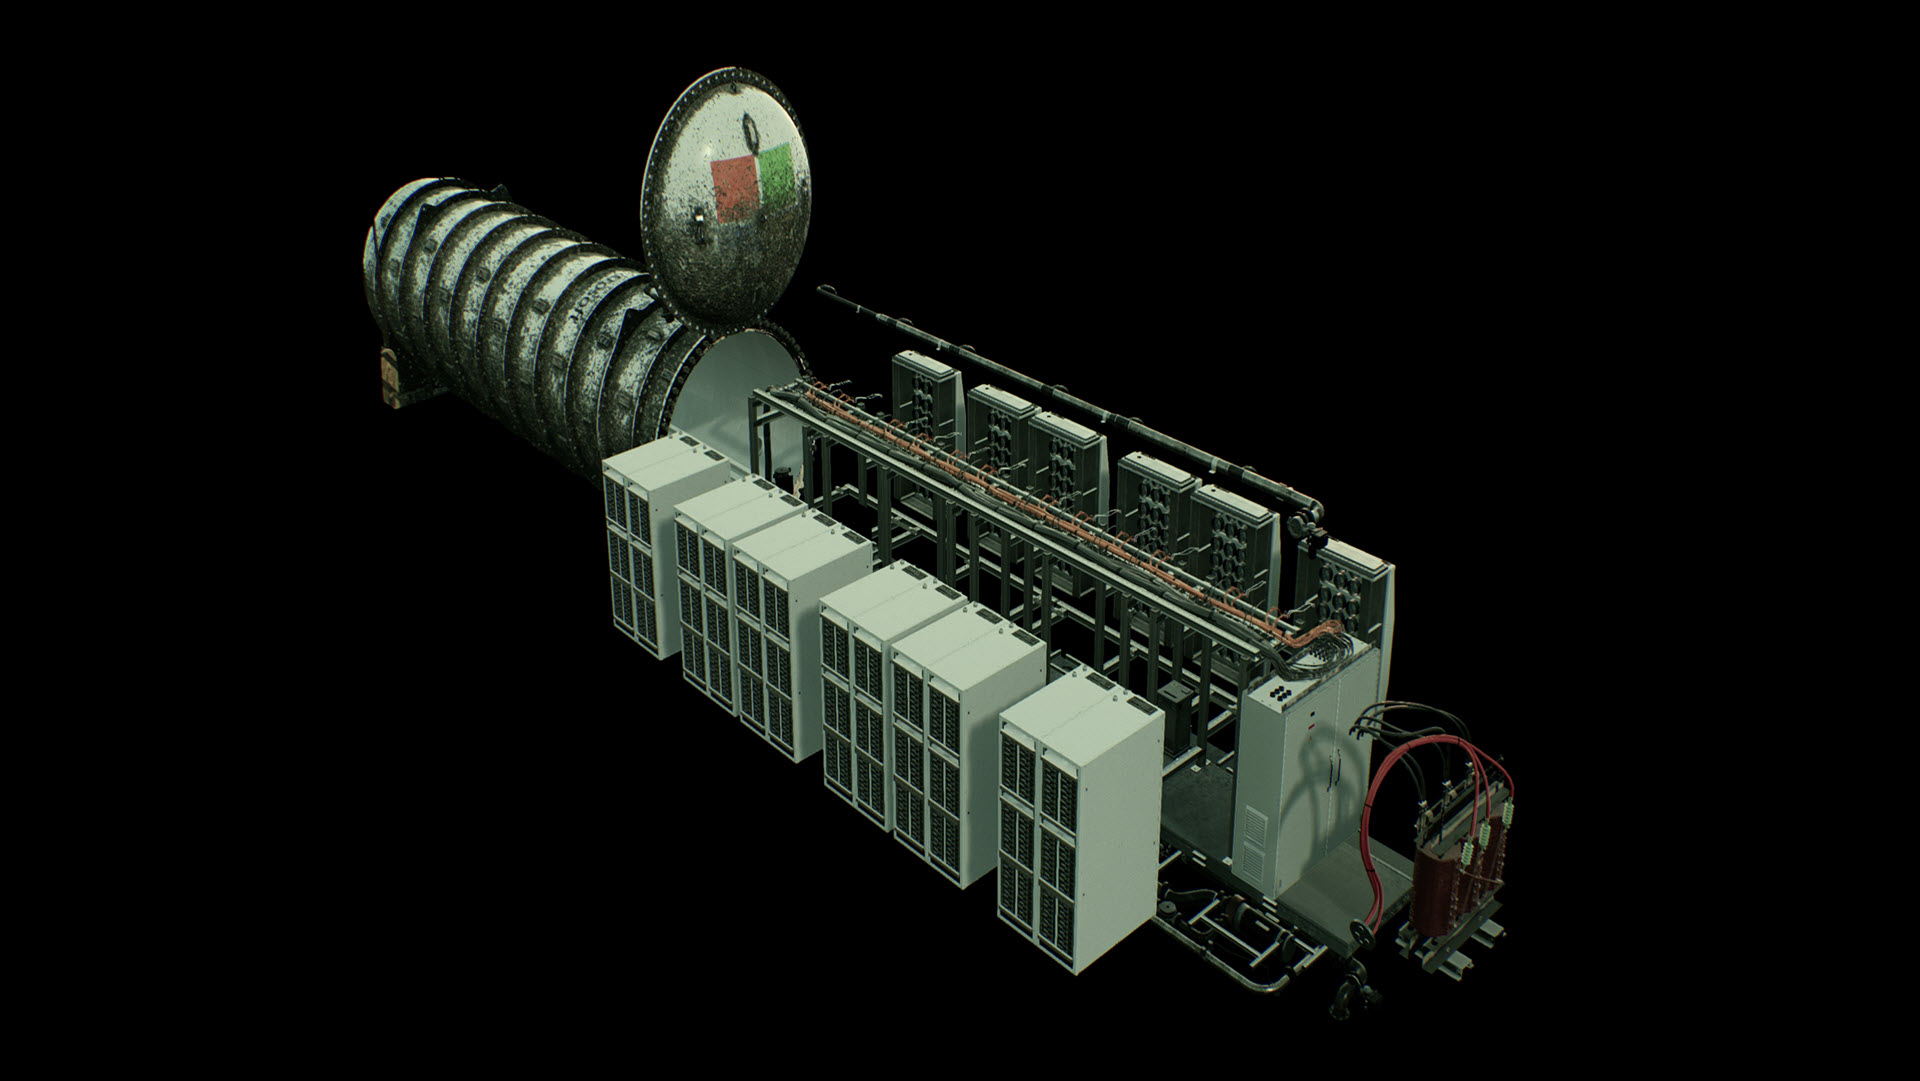 Artistic image of a Microsoft datacenter components designed to fit inside a submarine-like cylindrical tube.